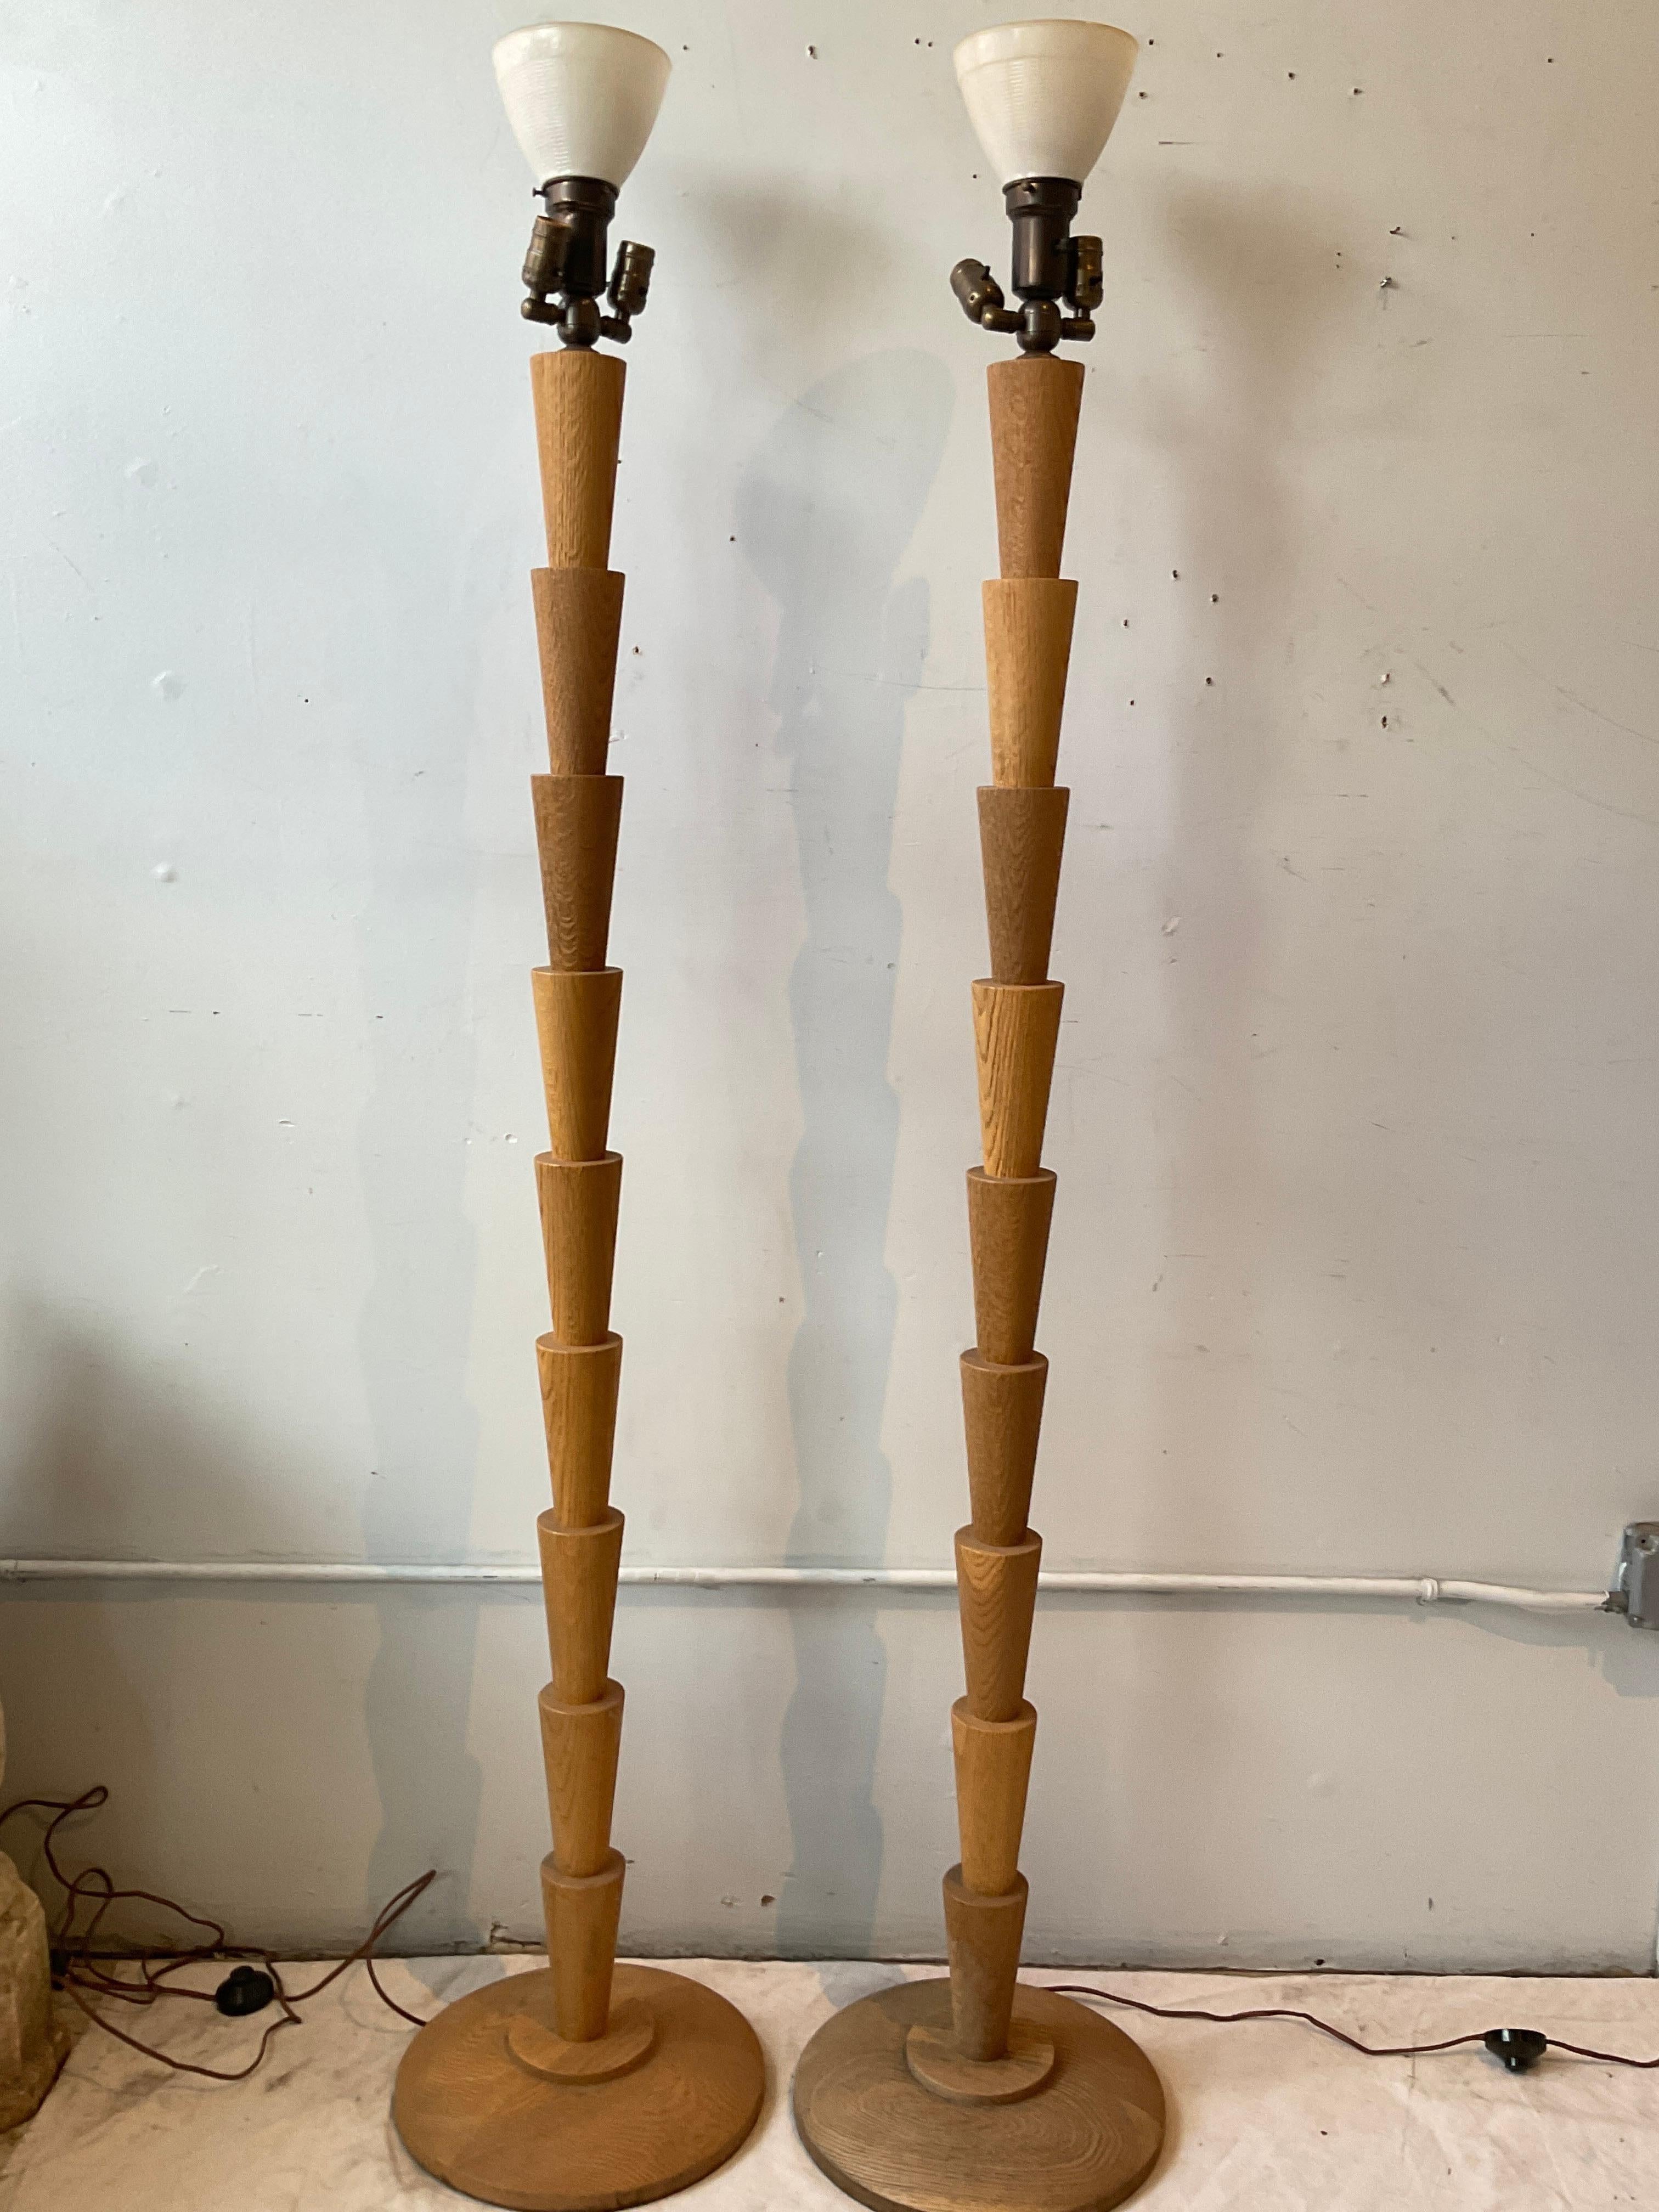 Pair of tall Deco style wood floor lamps. From a Southampton, NY estate. Has original wiring, needs rewiring.